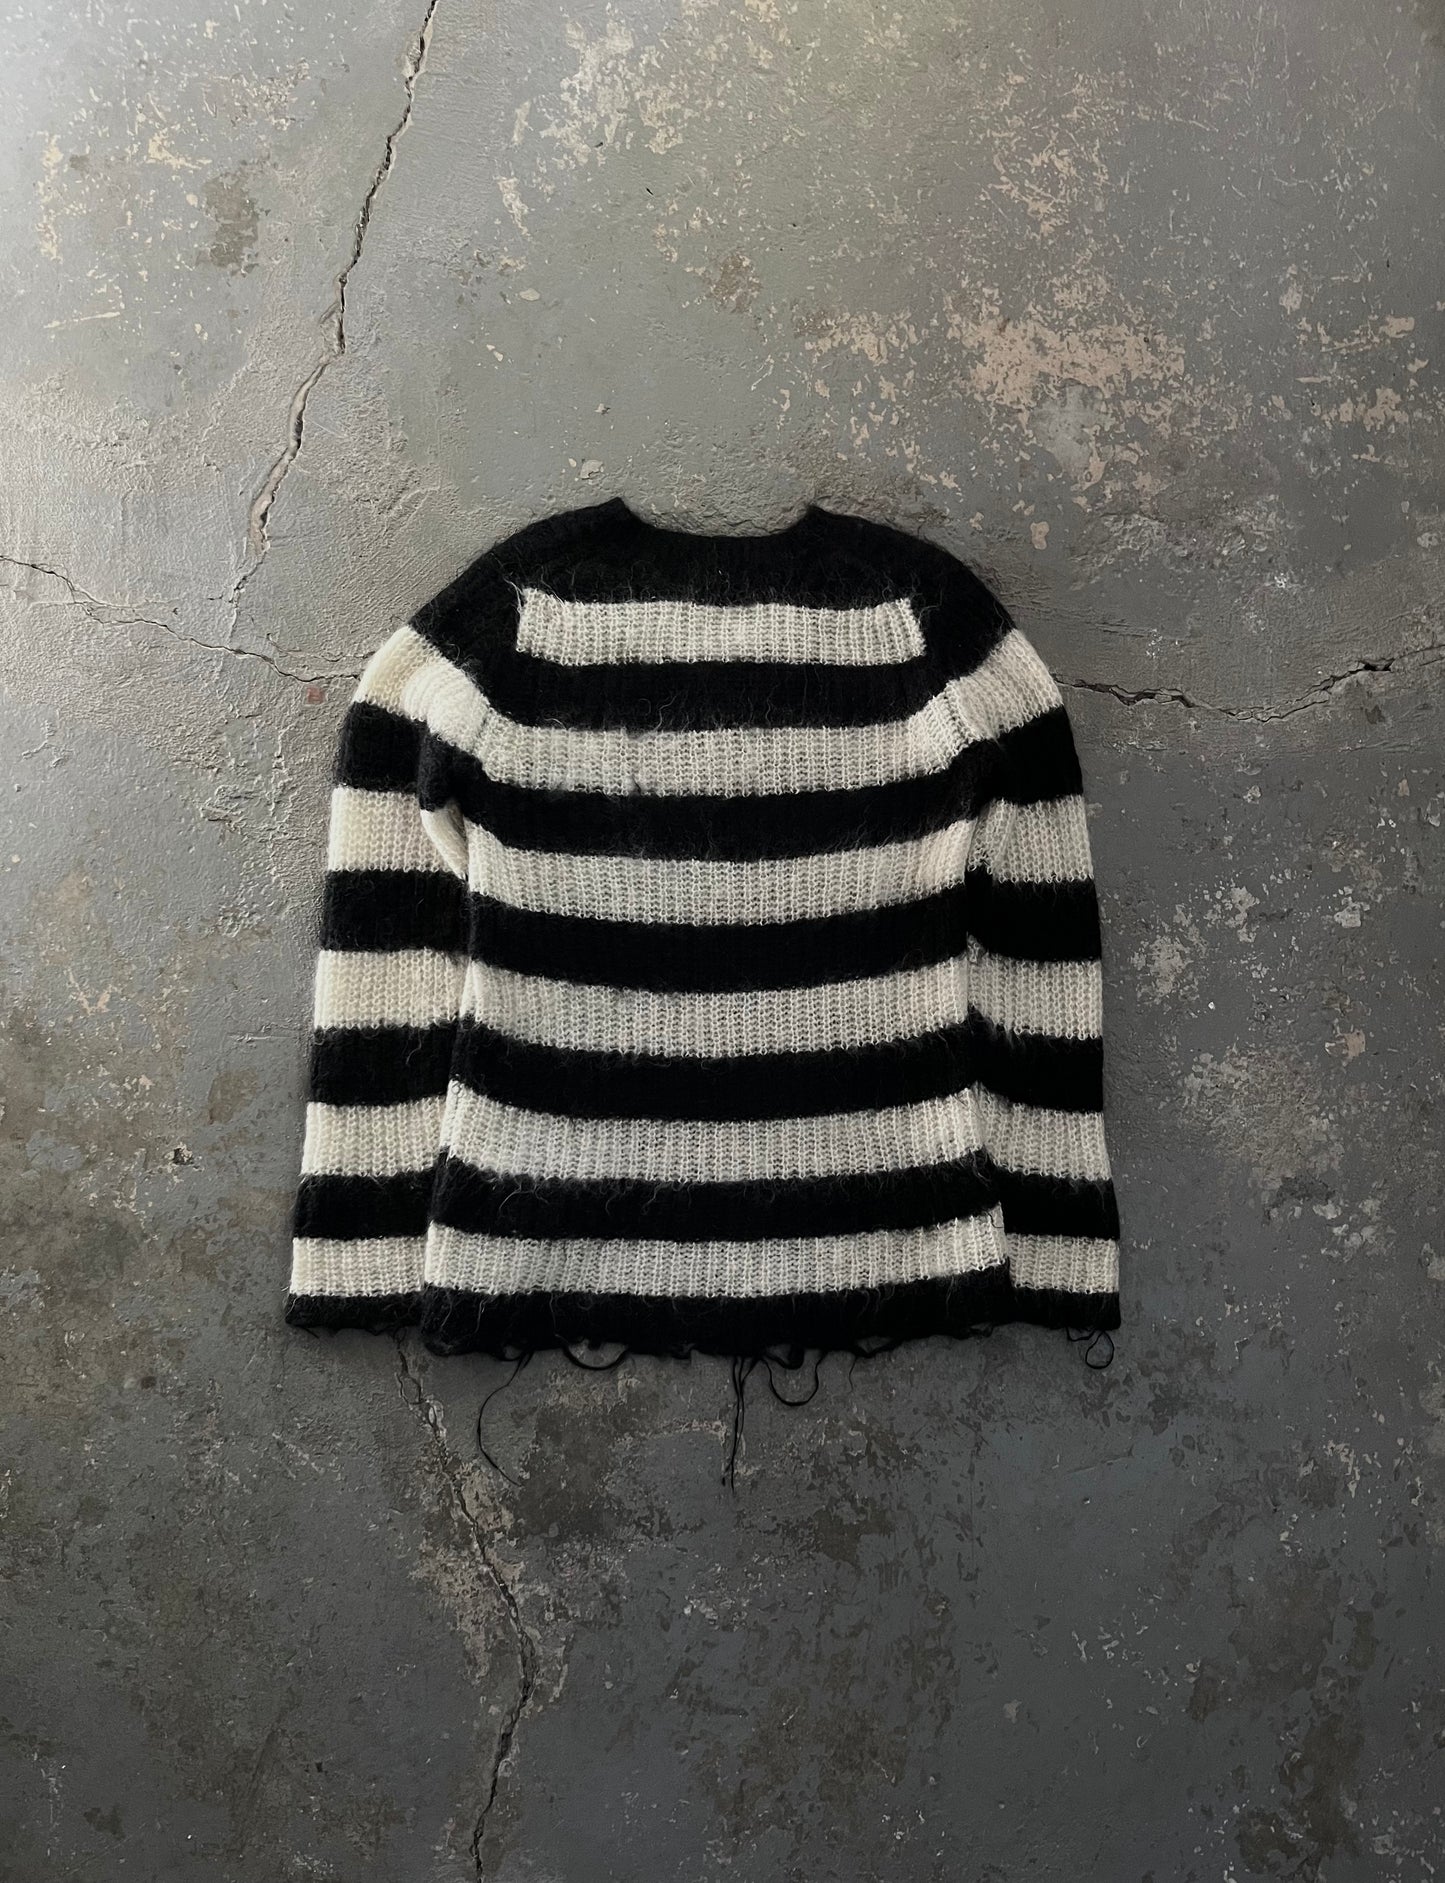 Junya Watanabe FW11 Distressed Striped Mohair Knit